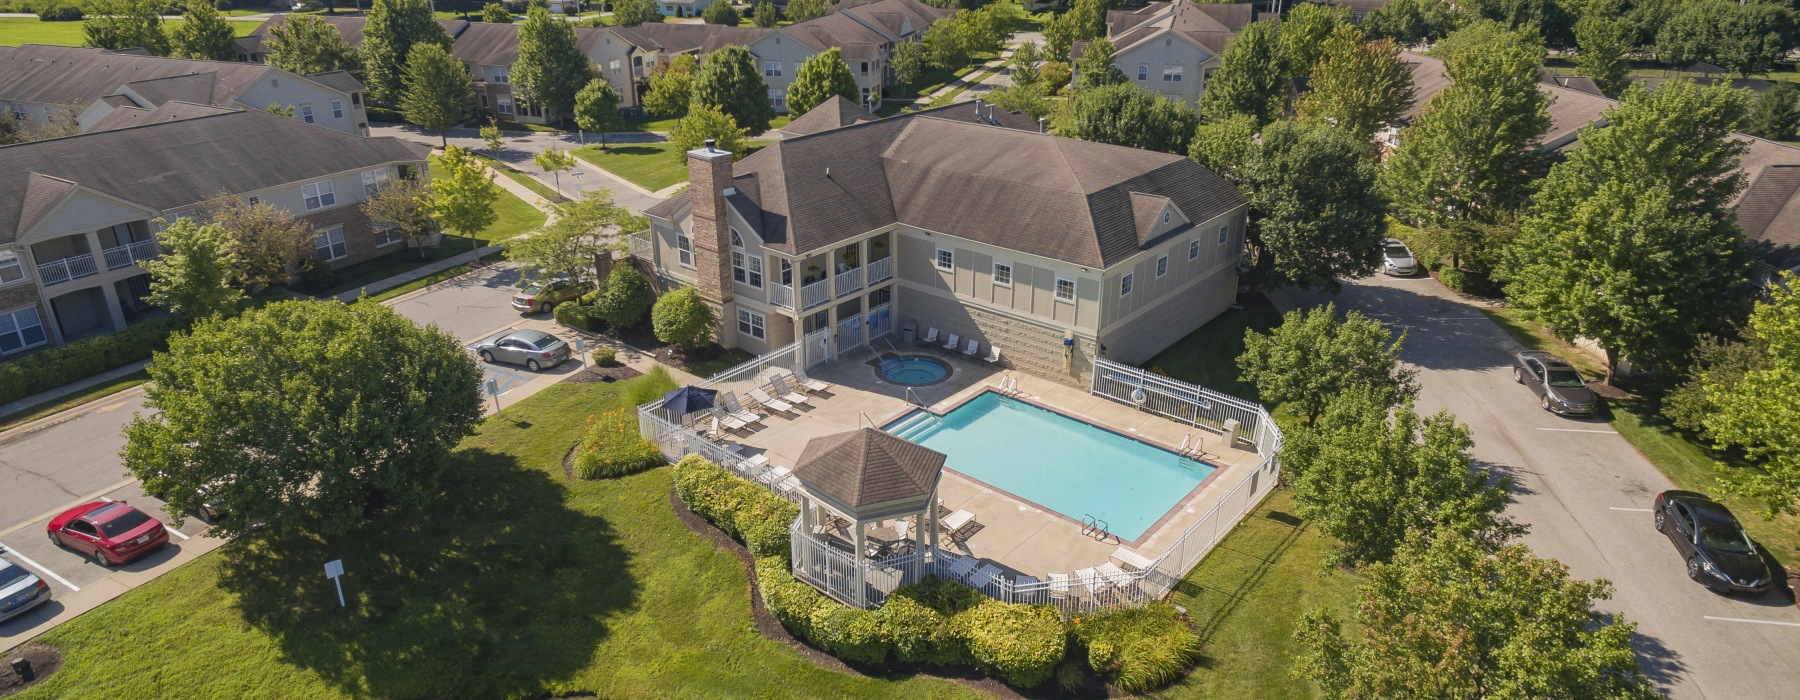 Apartment building exterior aerial photo with pool